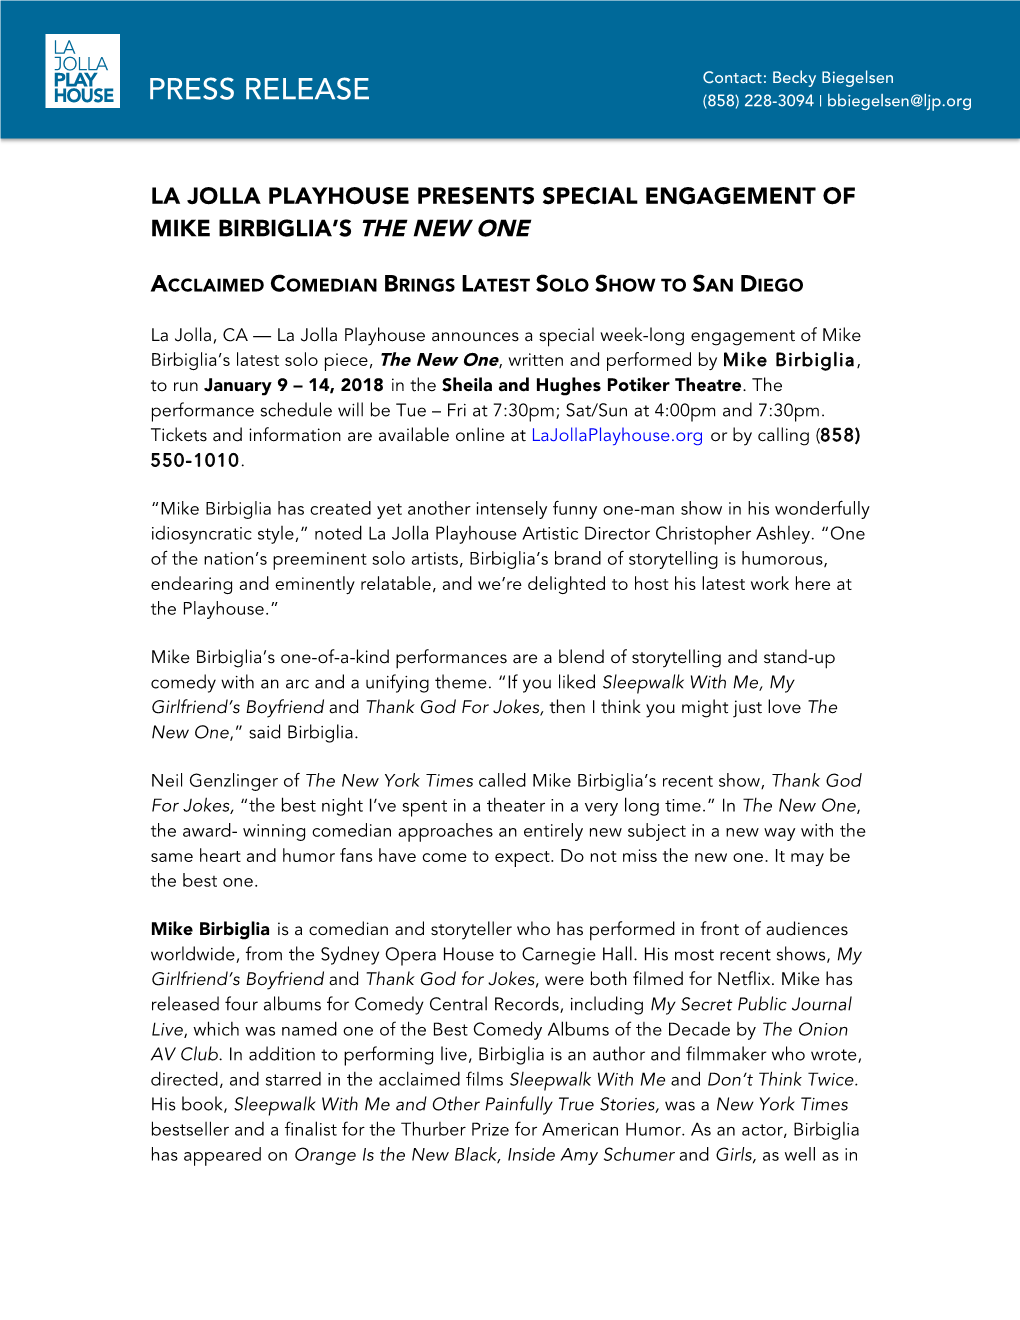 La Jolla Playhouse Presents Special Engagement of Mike Birbiglia's The